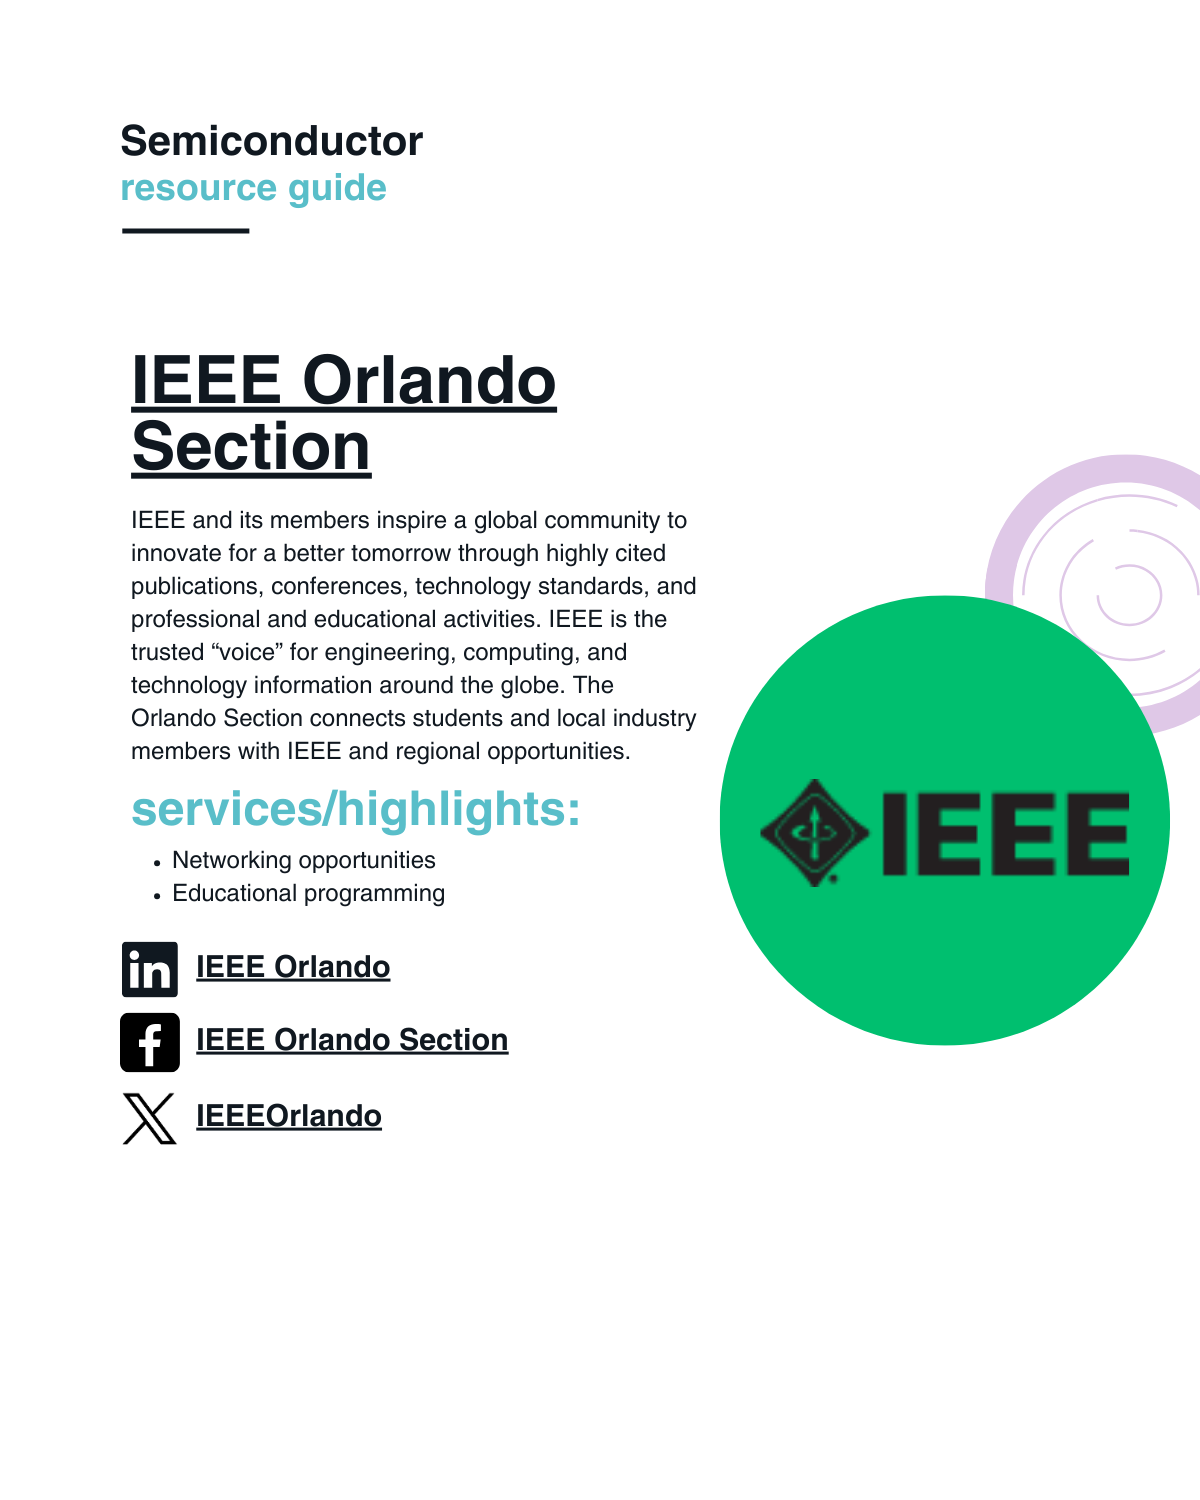 IEEE and its members inspire a global community to innovate for a better tomorrow through highly cited publications, conferences, technology standards, and professional and educational activities. IEEE is the trusted “voice” for engineering, computing, and technology information around the globe. The Orlando Section connects students and local industry members with IEEE and regional opportunities.